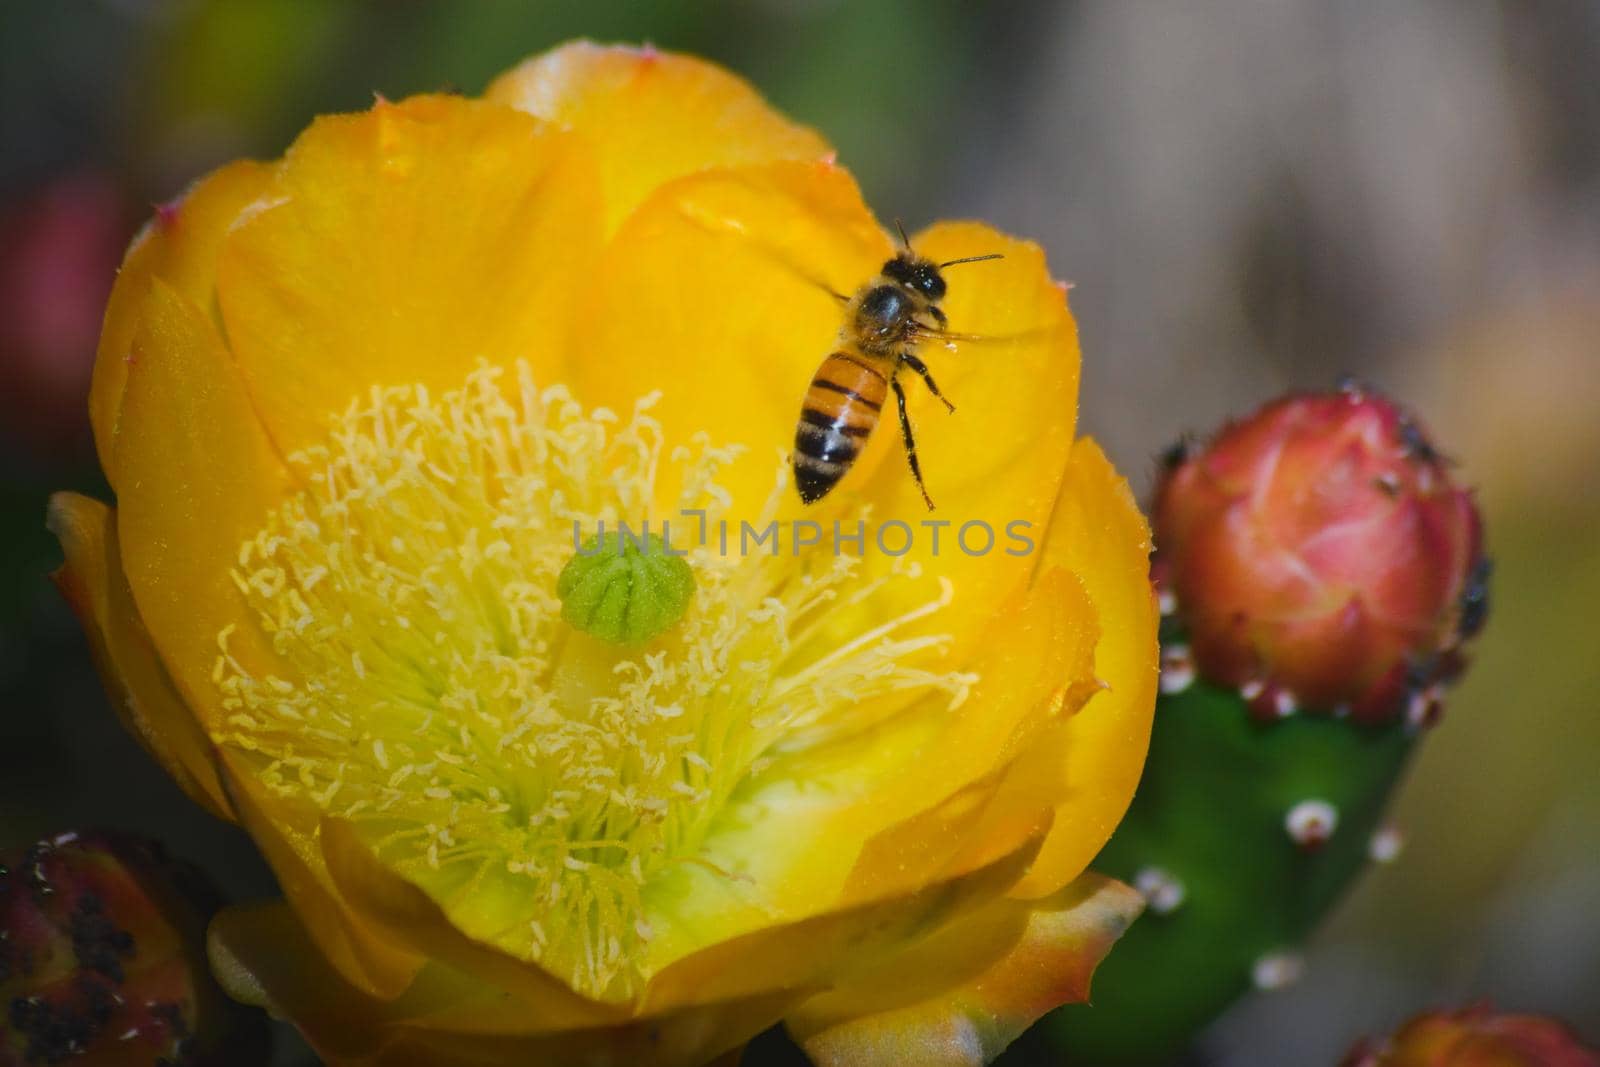 Honey bee collecting nectar and pollen from a blossoming cactus flower in late spring. Macro close up.